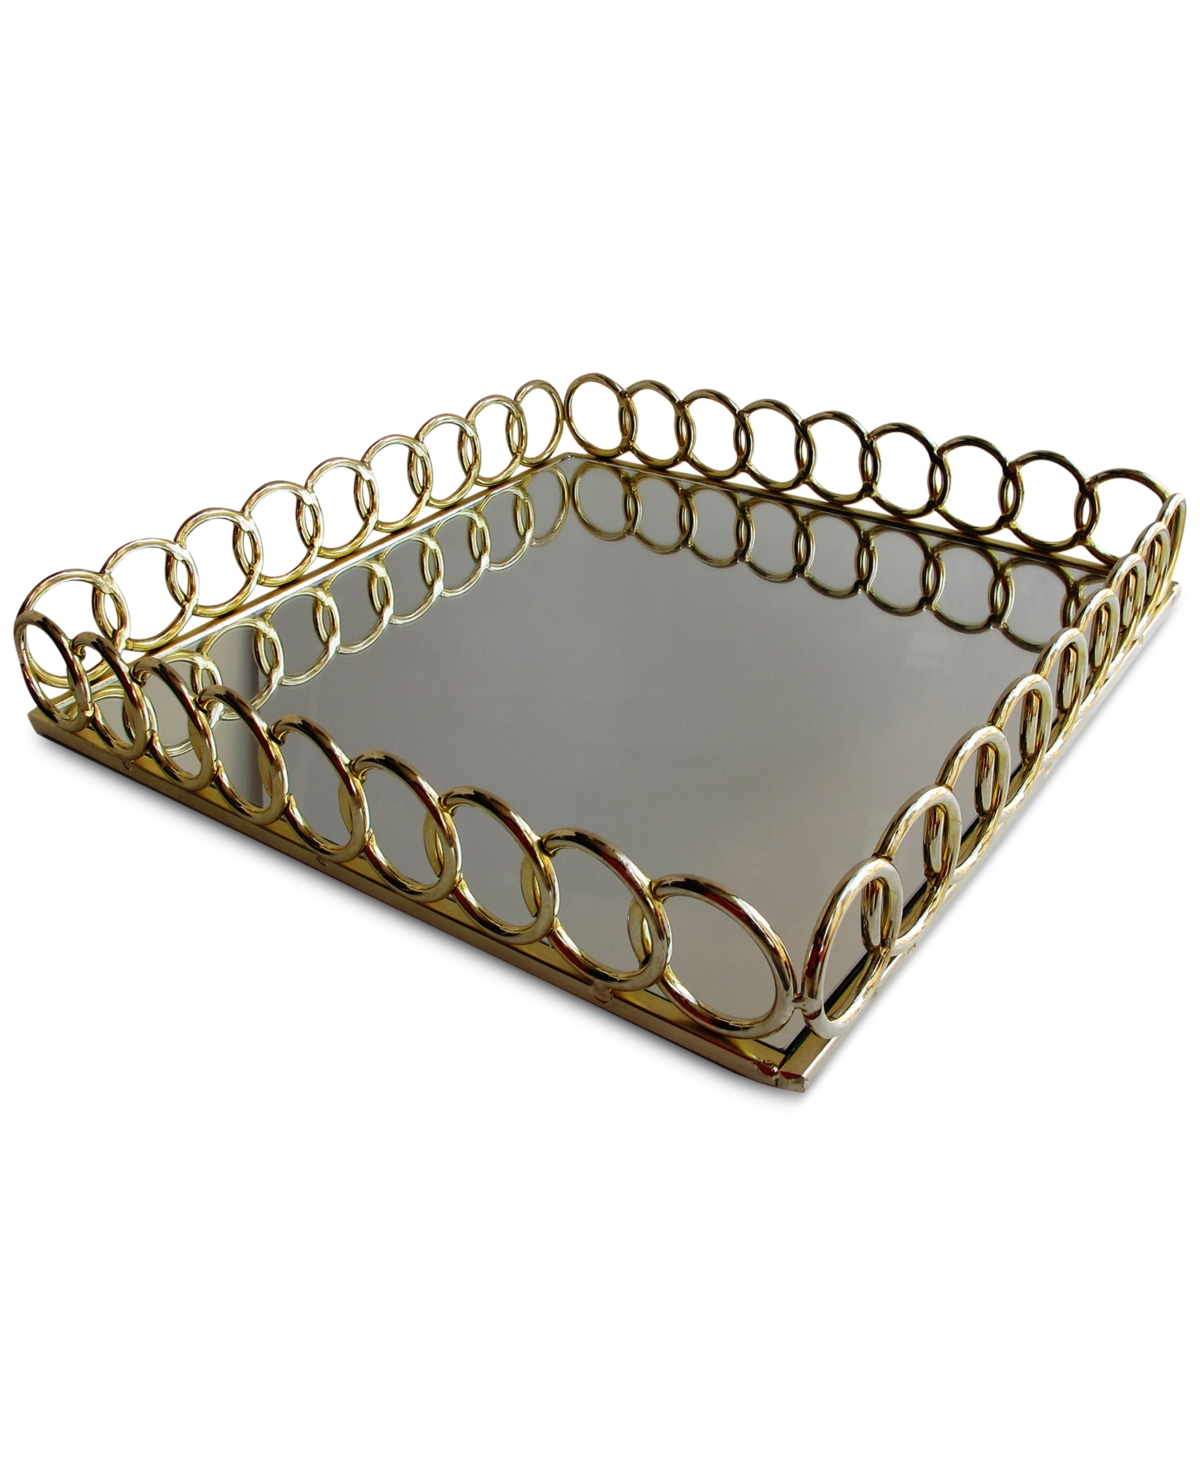 Jay Imports Square Link Mirrored Tray In Gold